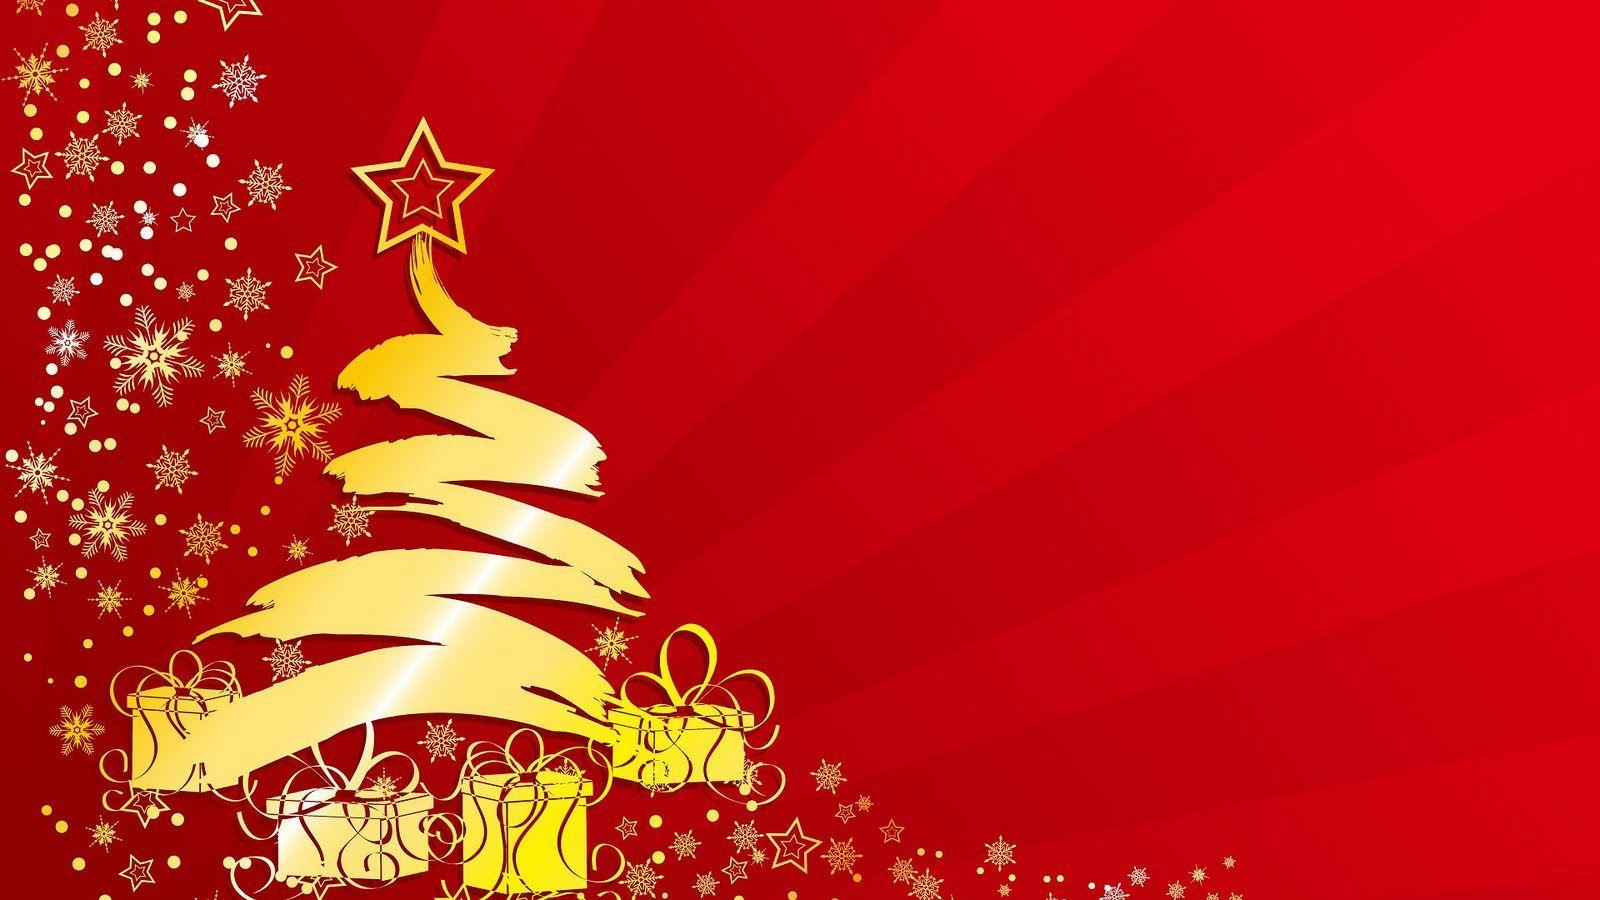 Free Christmas Background Image, Download Free Clip Art, Free Clip